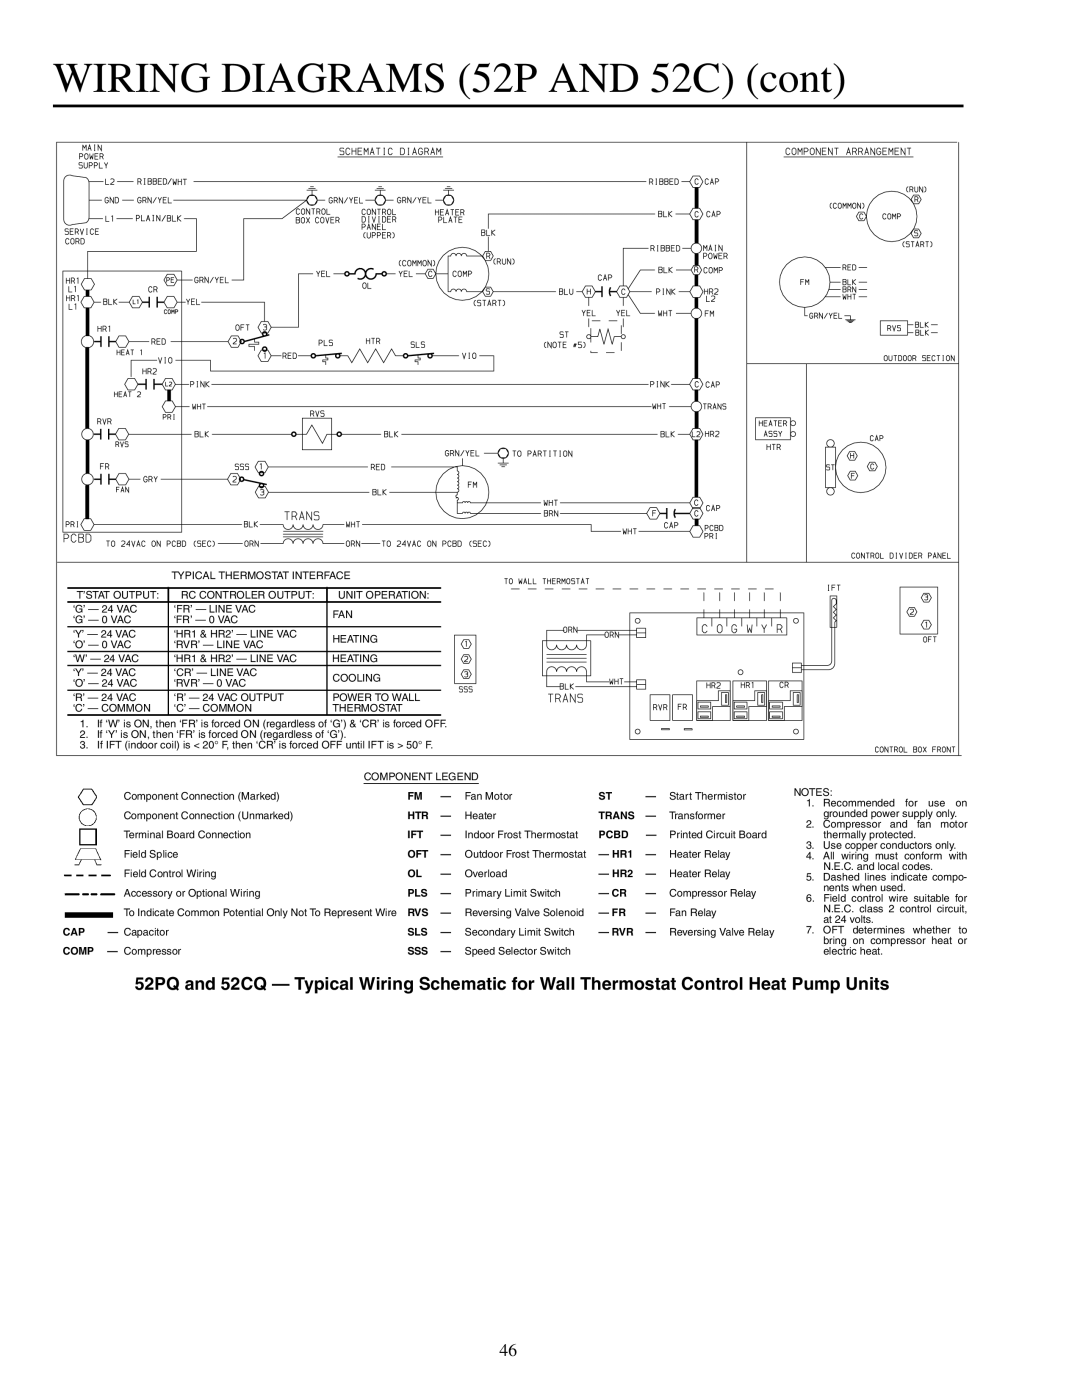 Carrier 592-085 warranty WIRING DIAGRAMS 52P AND 52C cont 